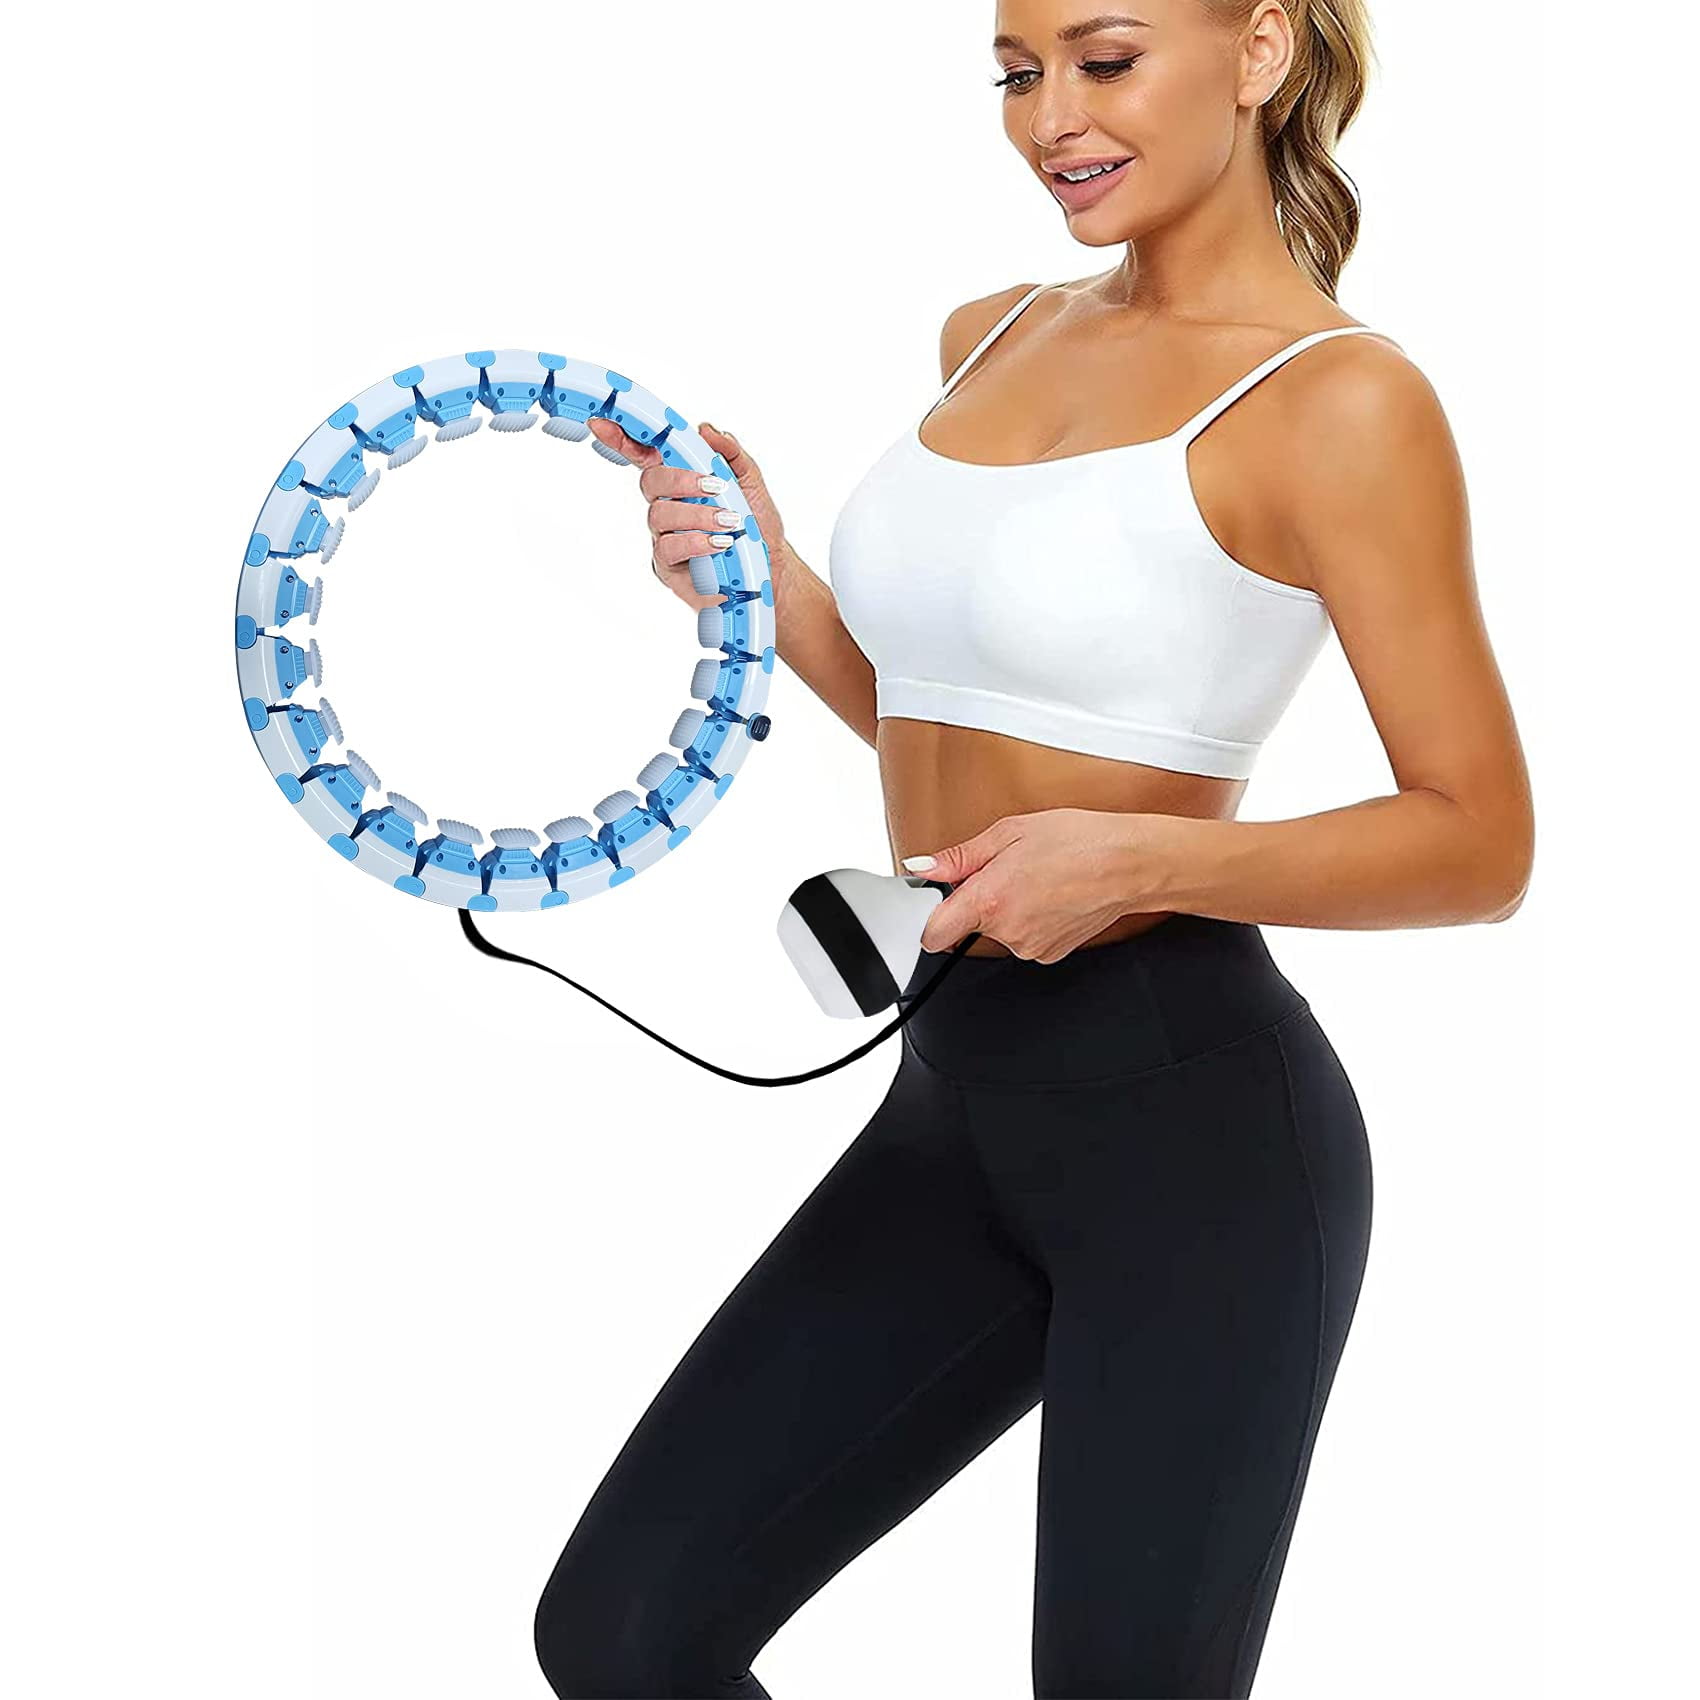 SLERFT Smart Weighted Hola Hoop With 24 Detachable Fitness Hula Hoop 